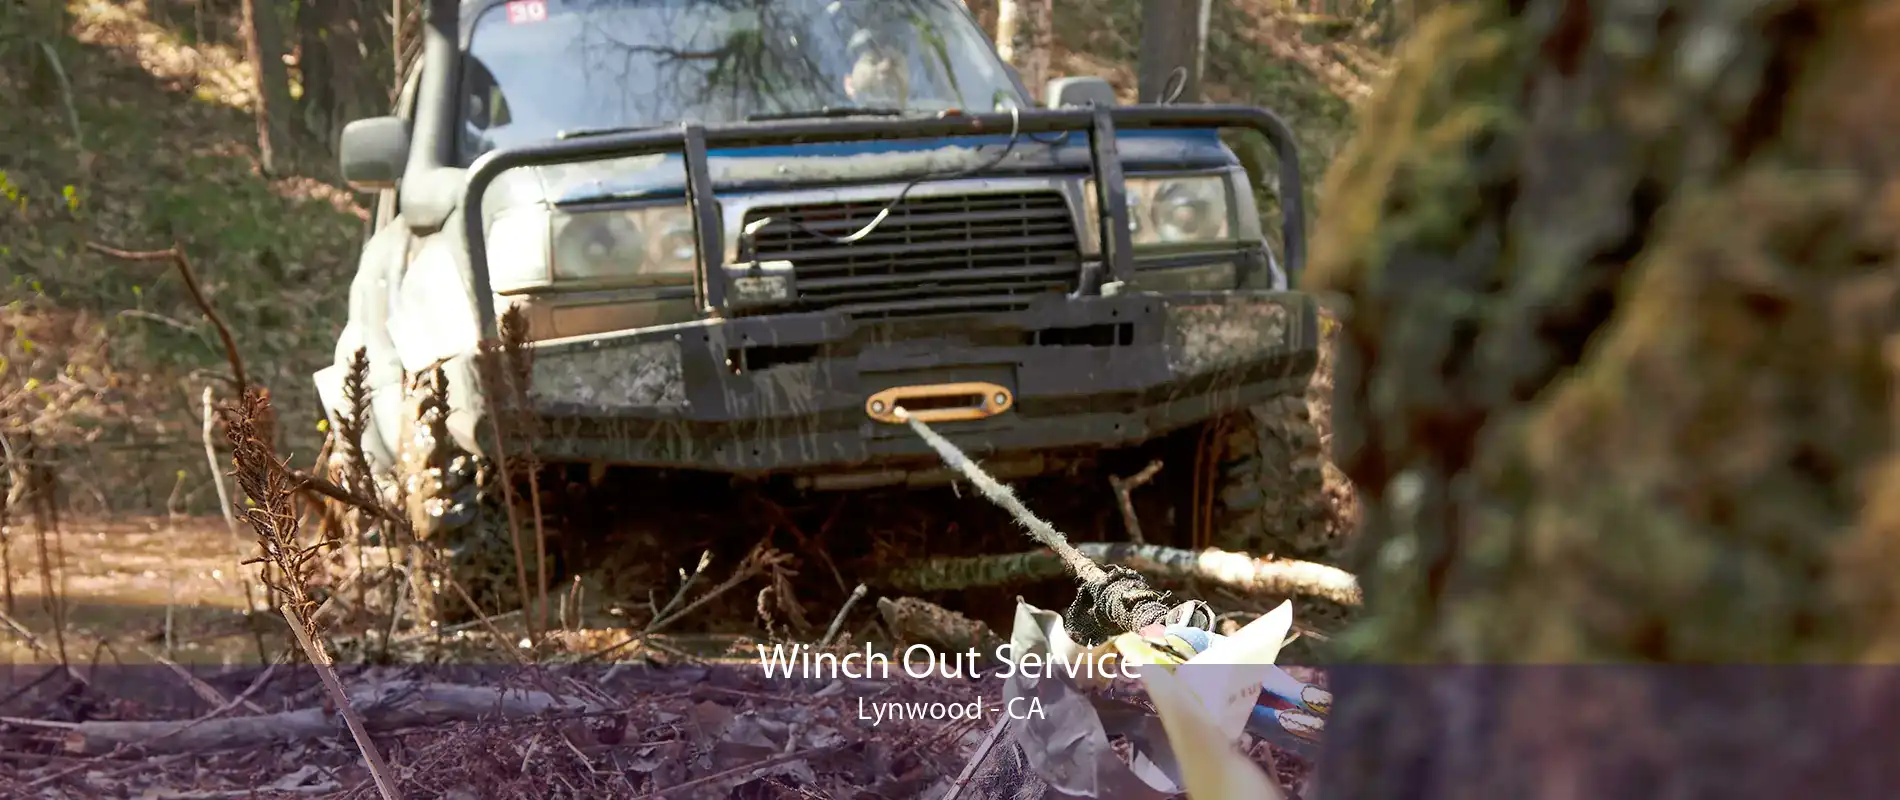 Winch Out Service Lynwood - CA